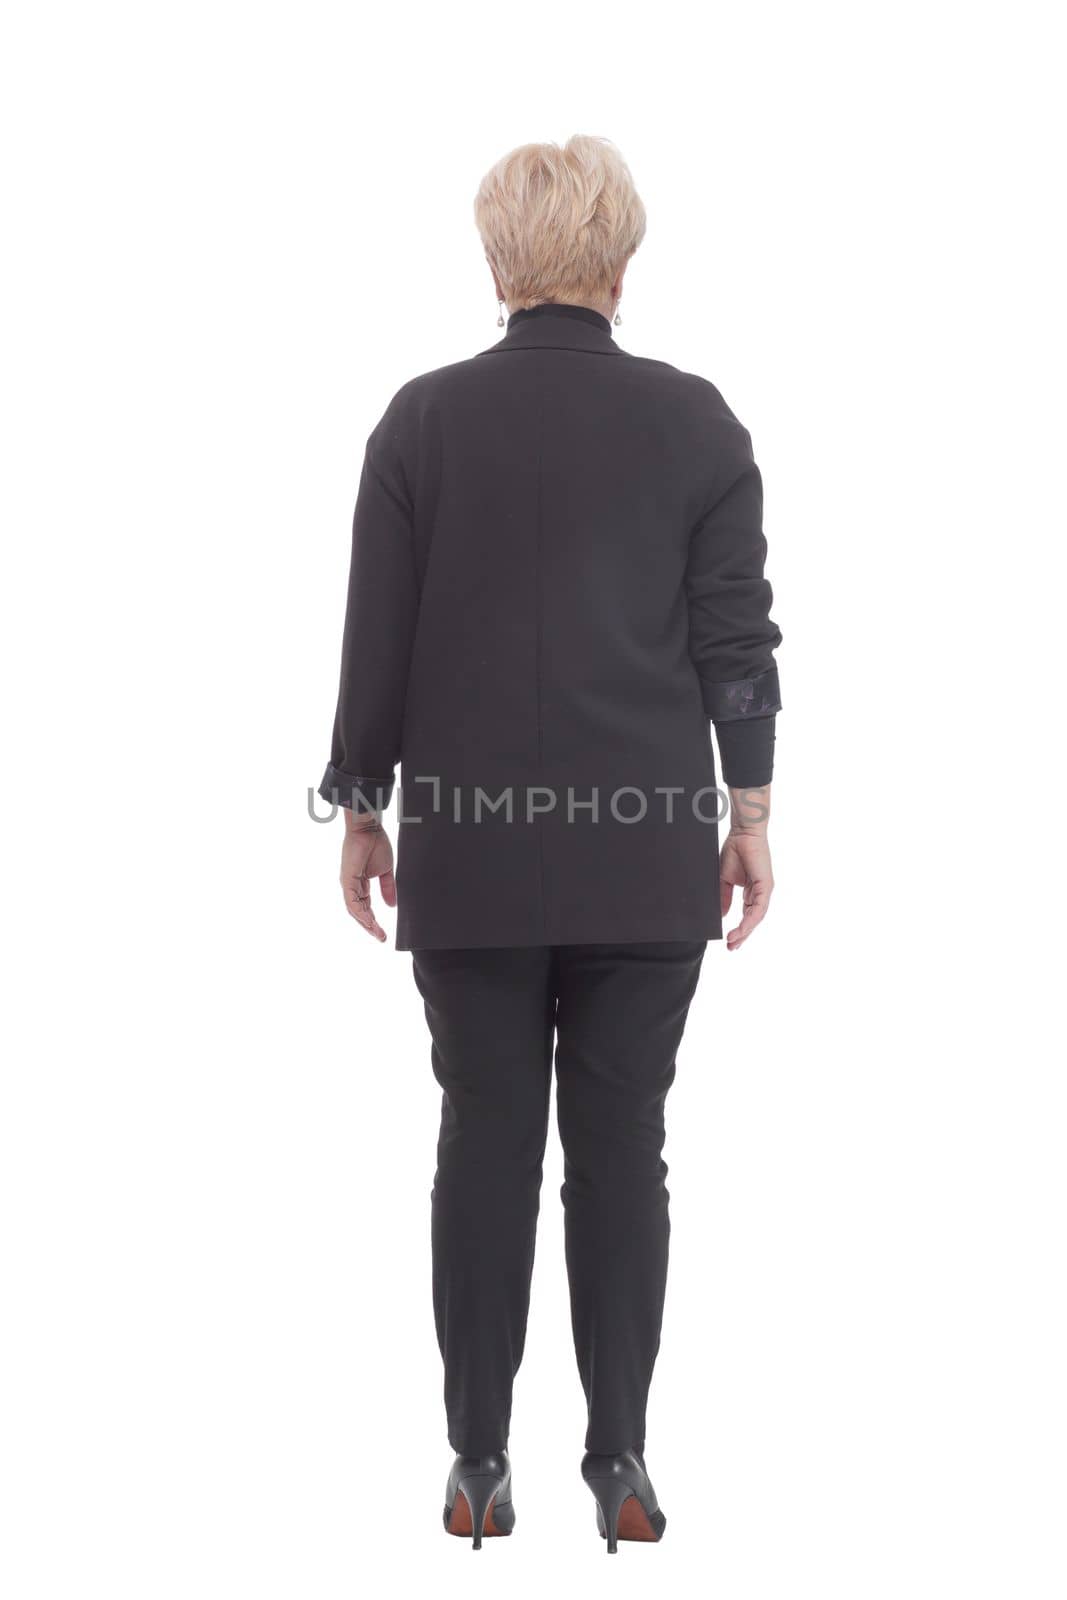 rear view. business woman in casual clothes. isolated on a white background.